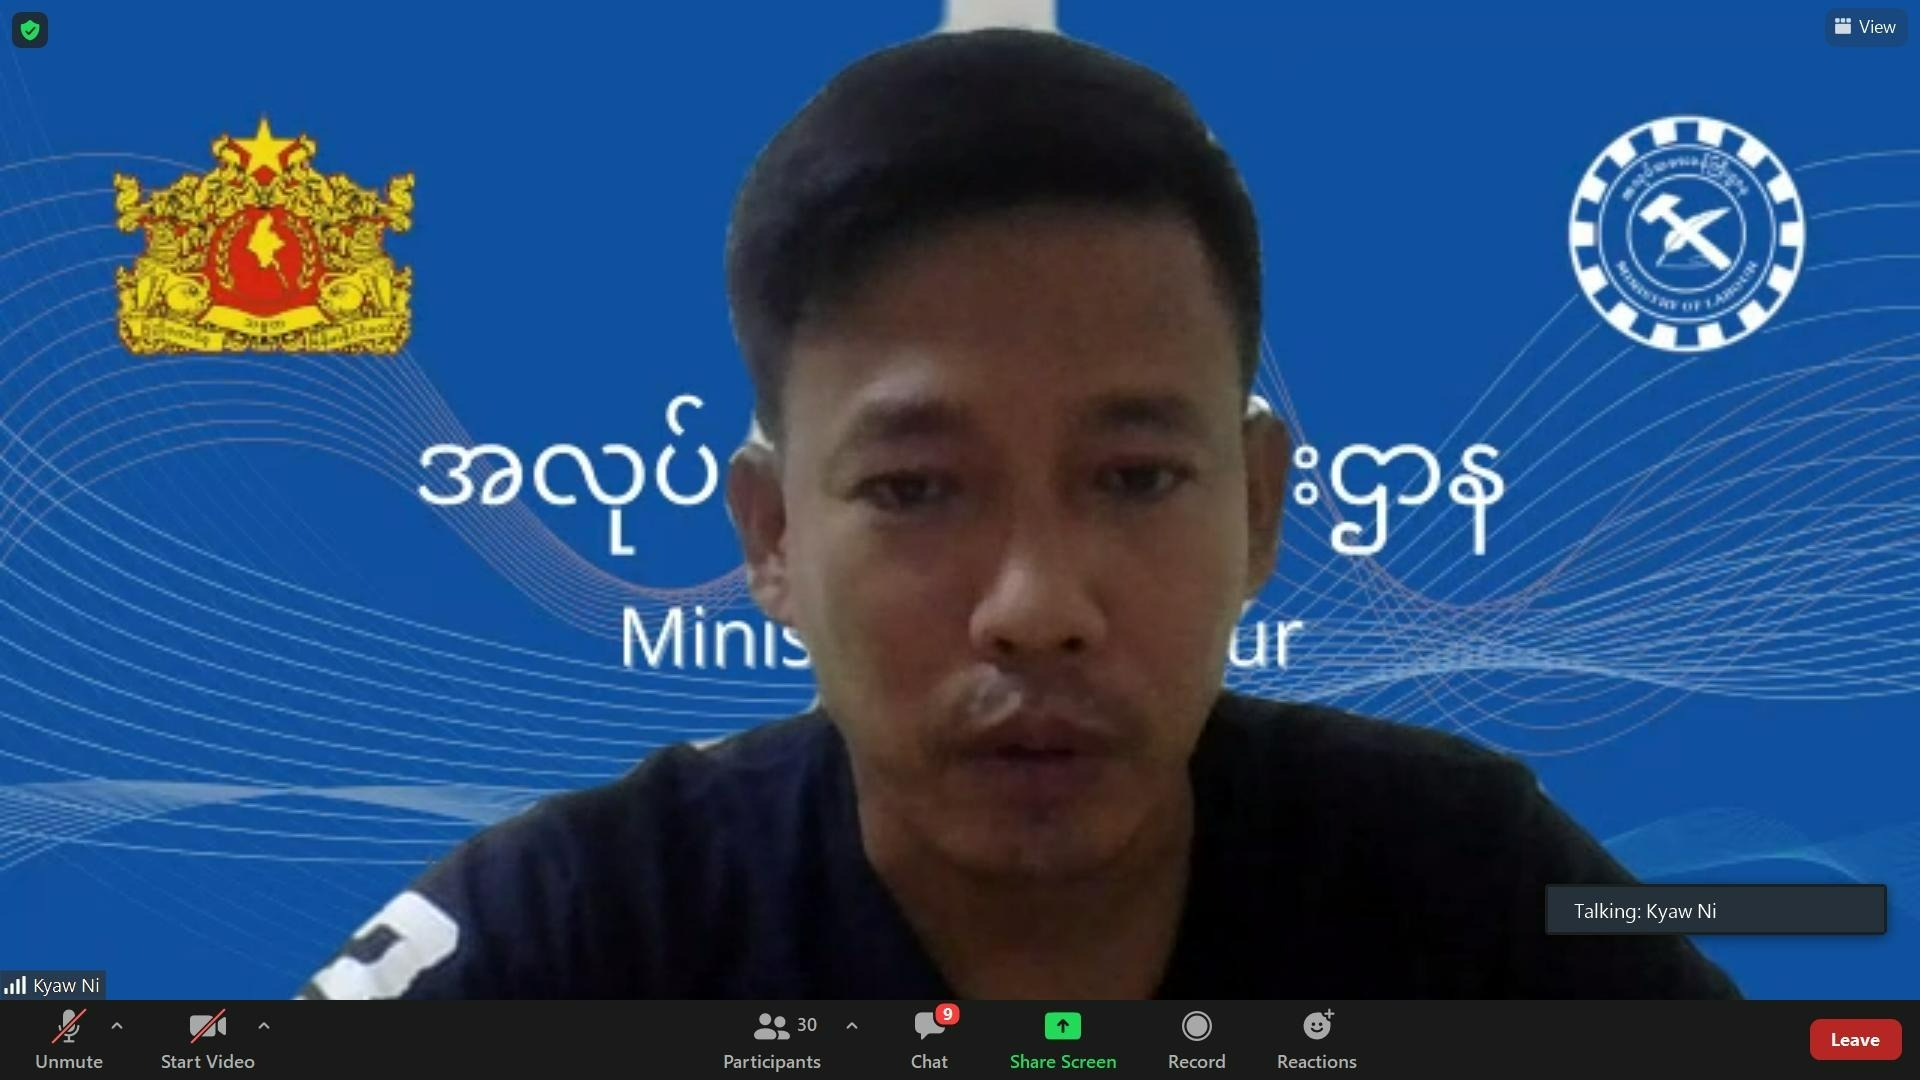 Ministry of Labour https://mol.nugmyanmar.org/news/meeting-with-mmwcs-discuss-labour-issues/